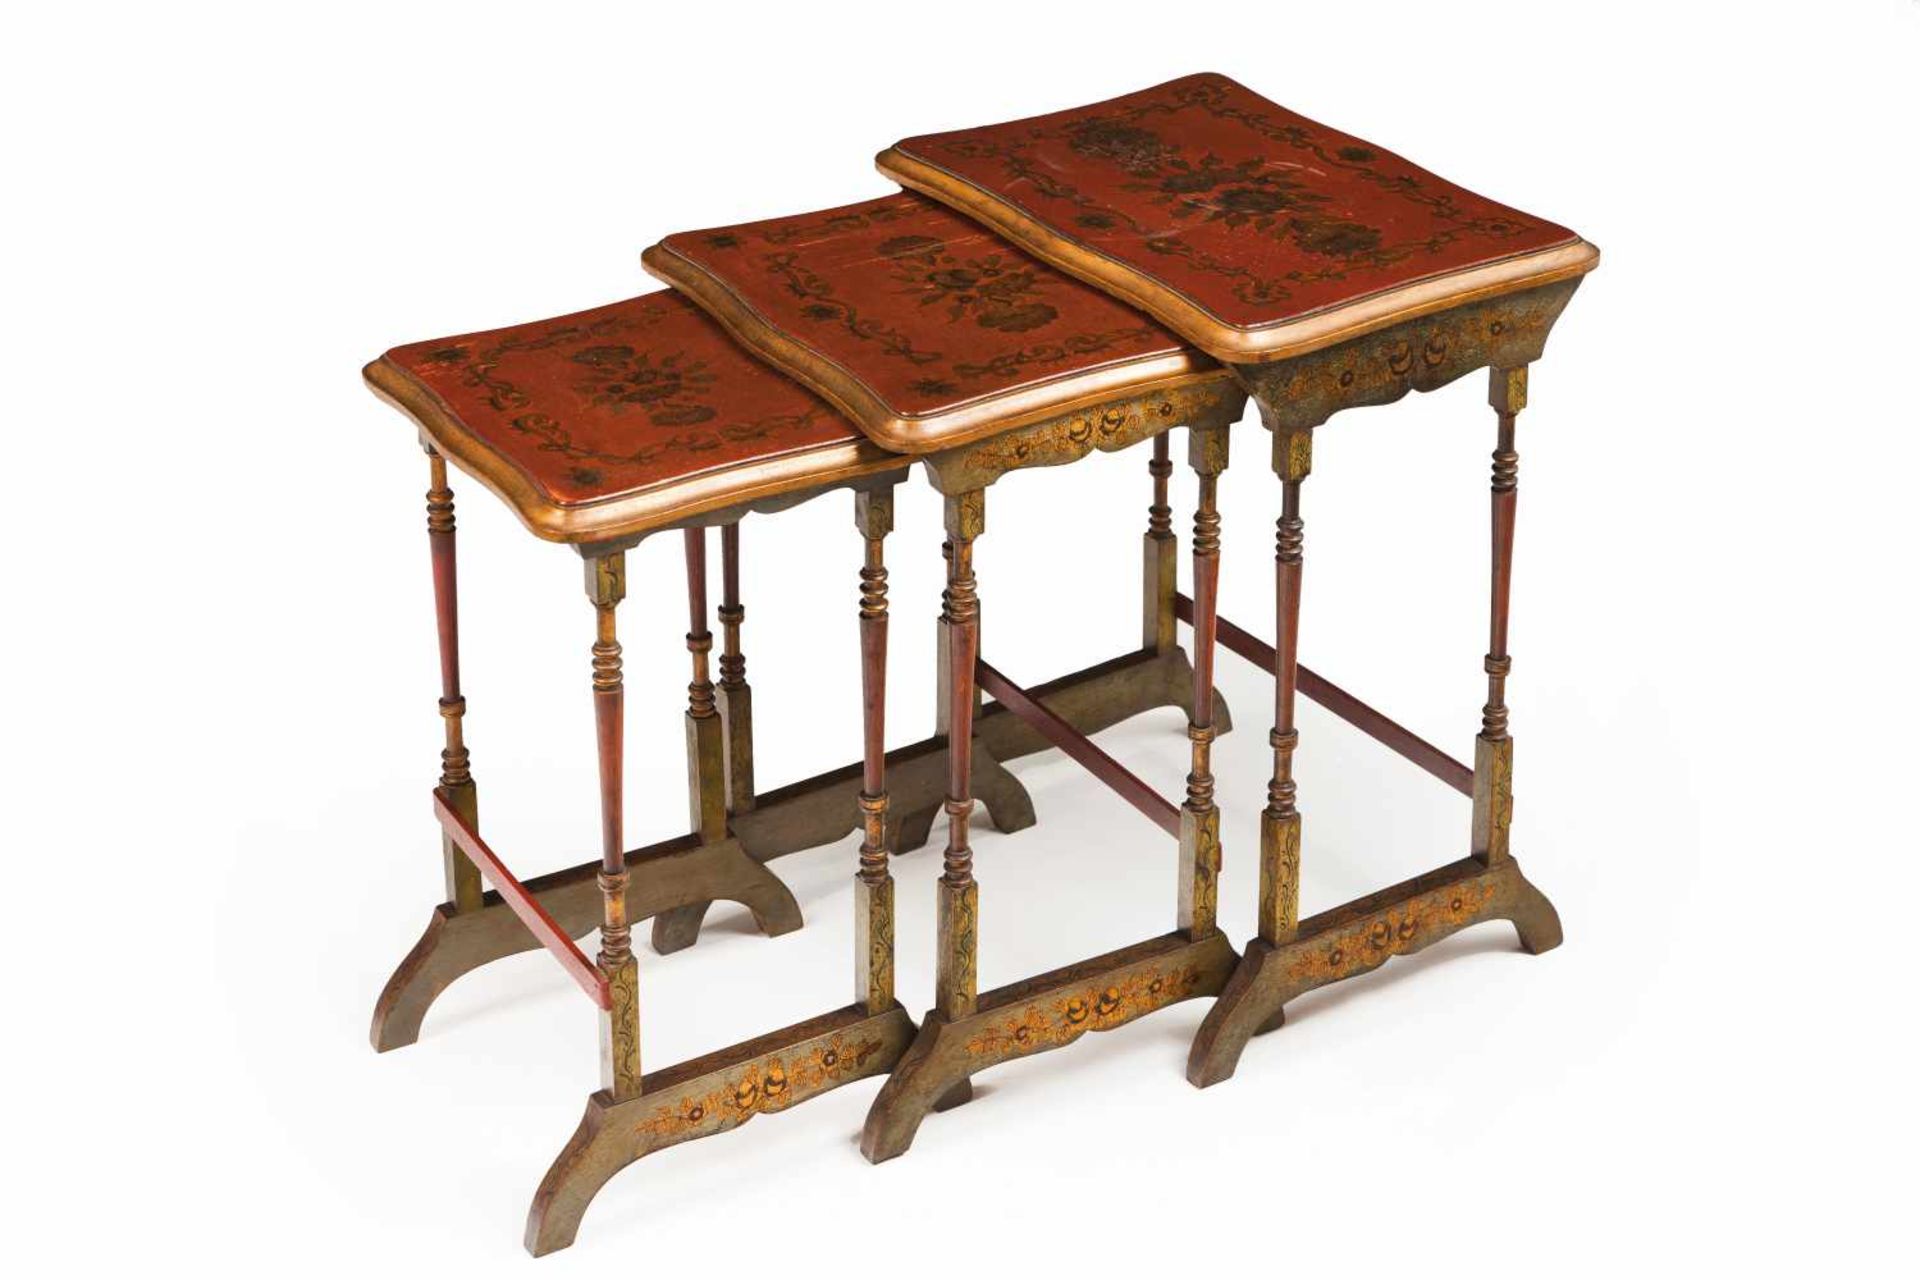 A three side tables setRed and green lacquered wood of gilt foliage motif decorationEngland